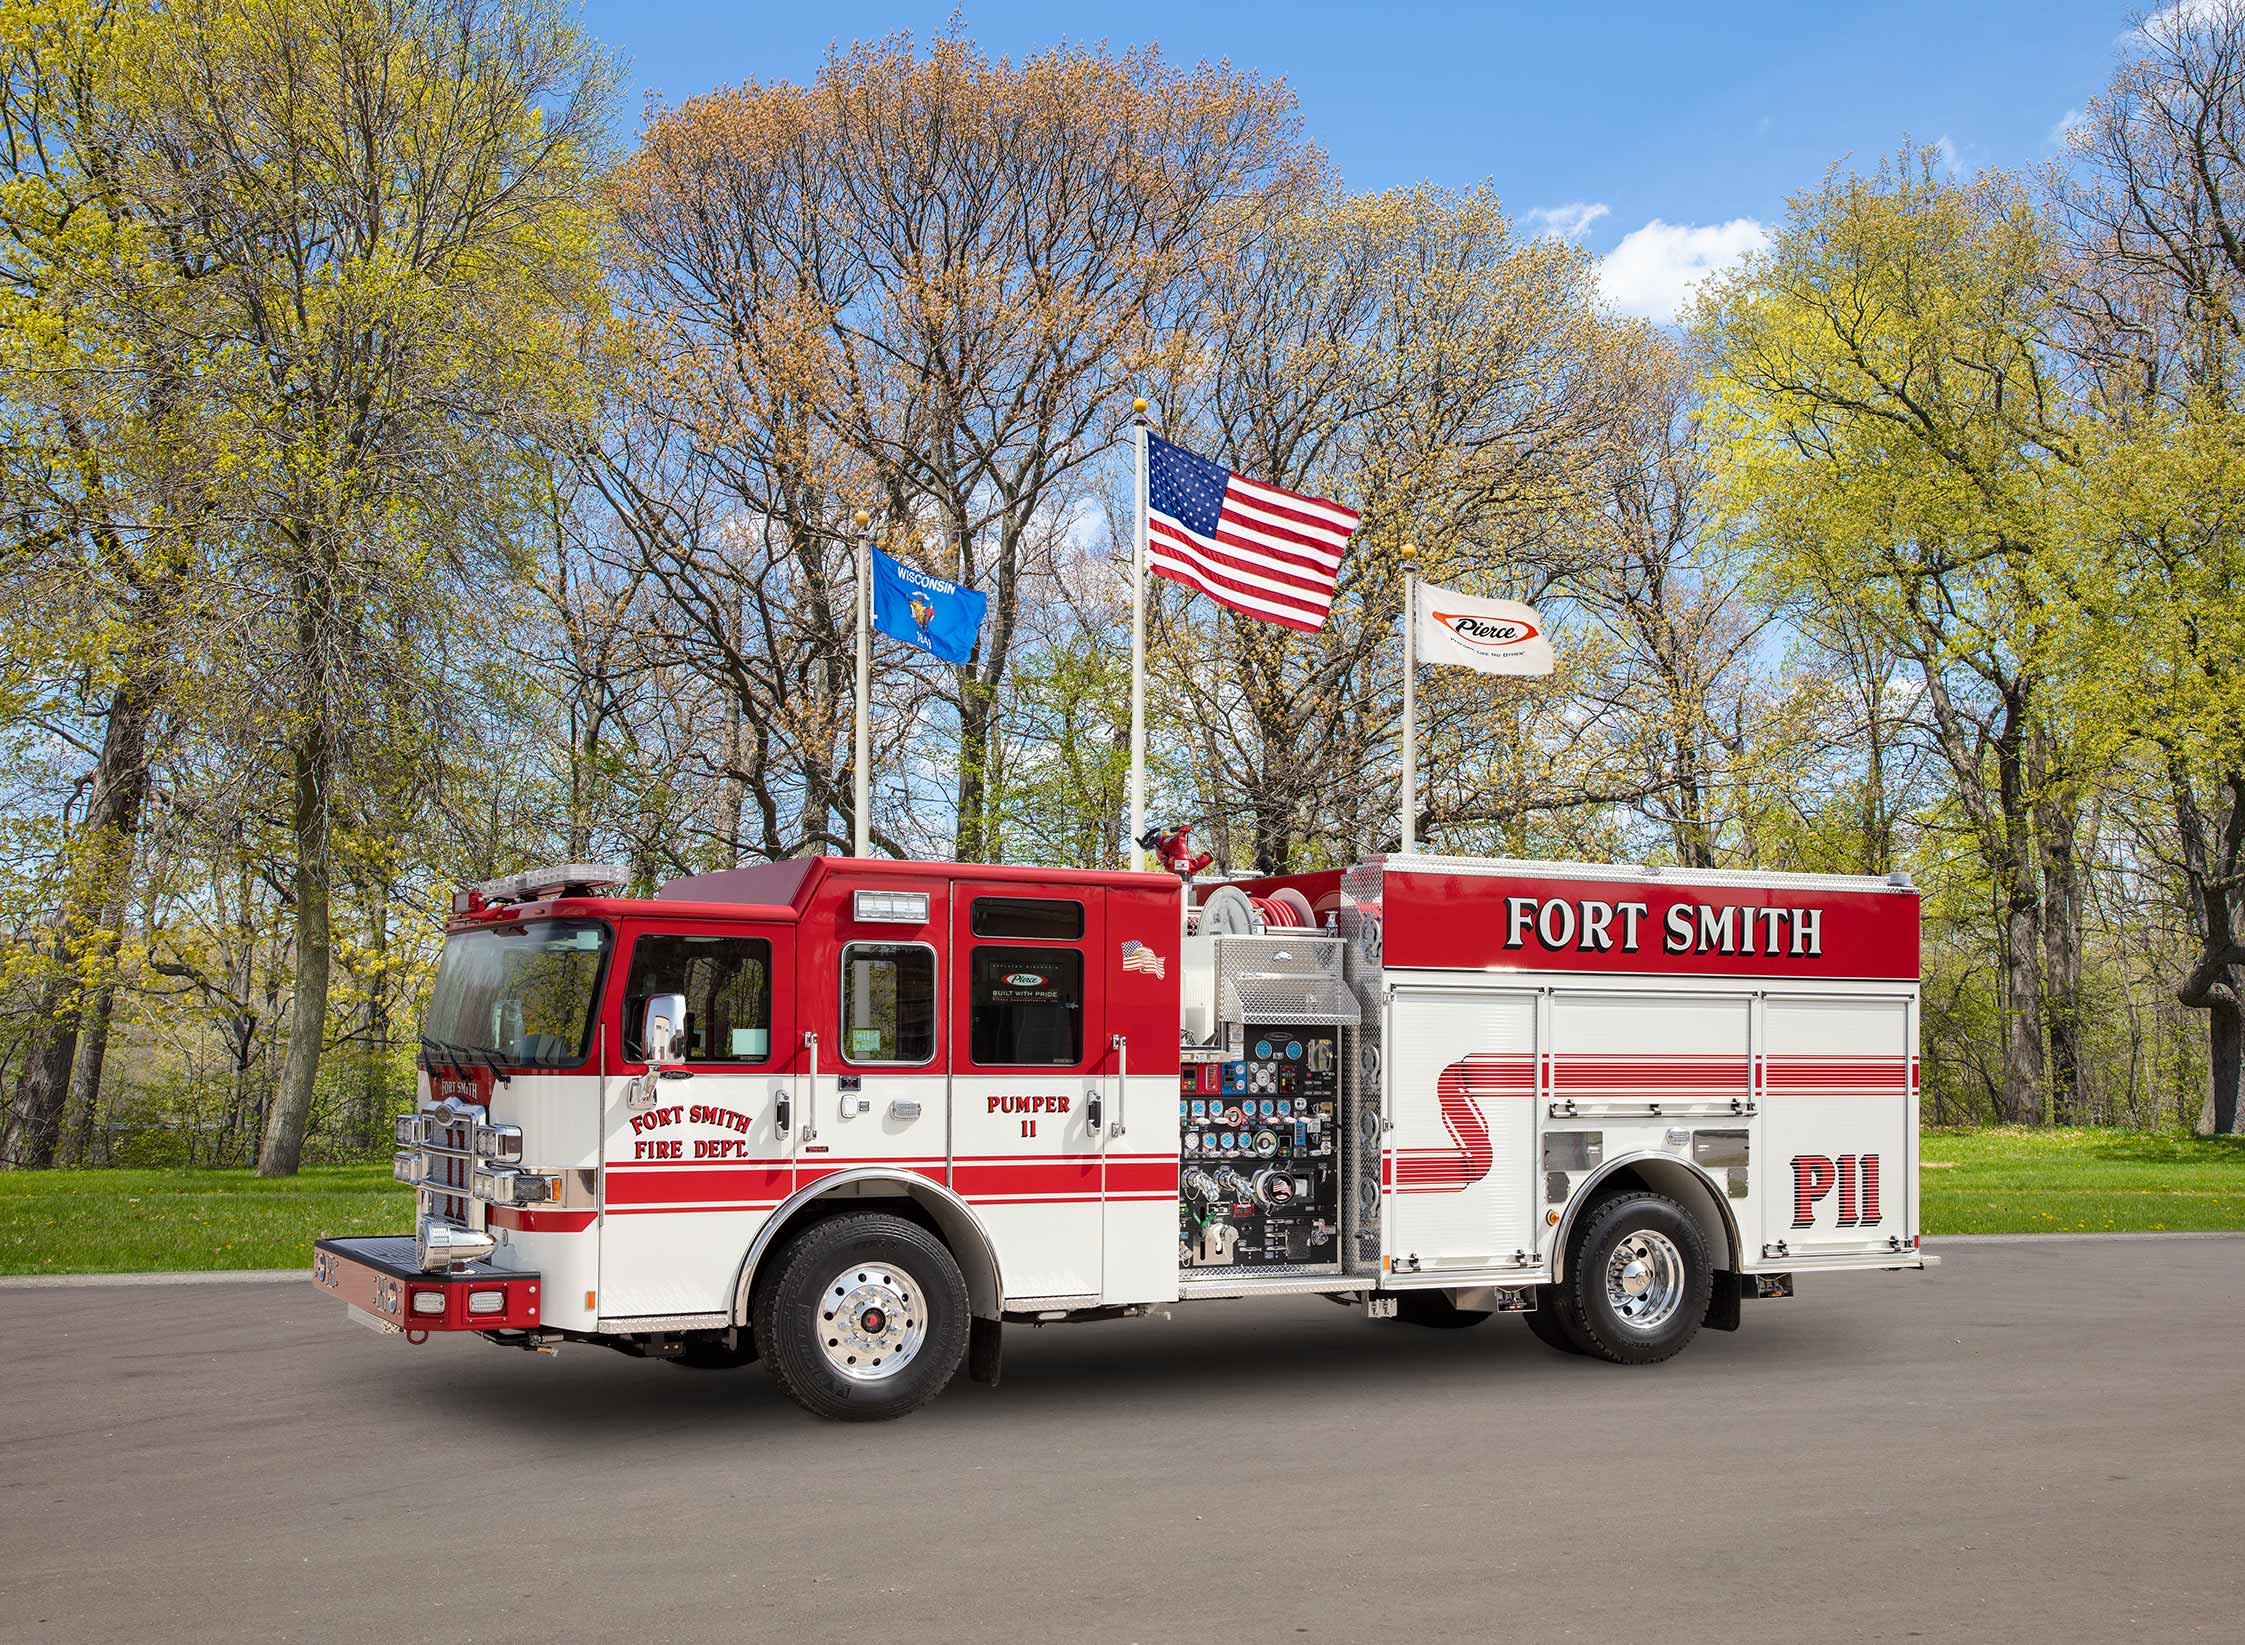 Fort Smith Fire Department - Pumper